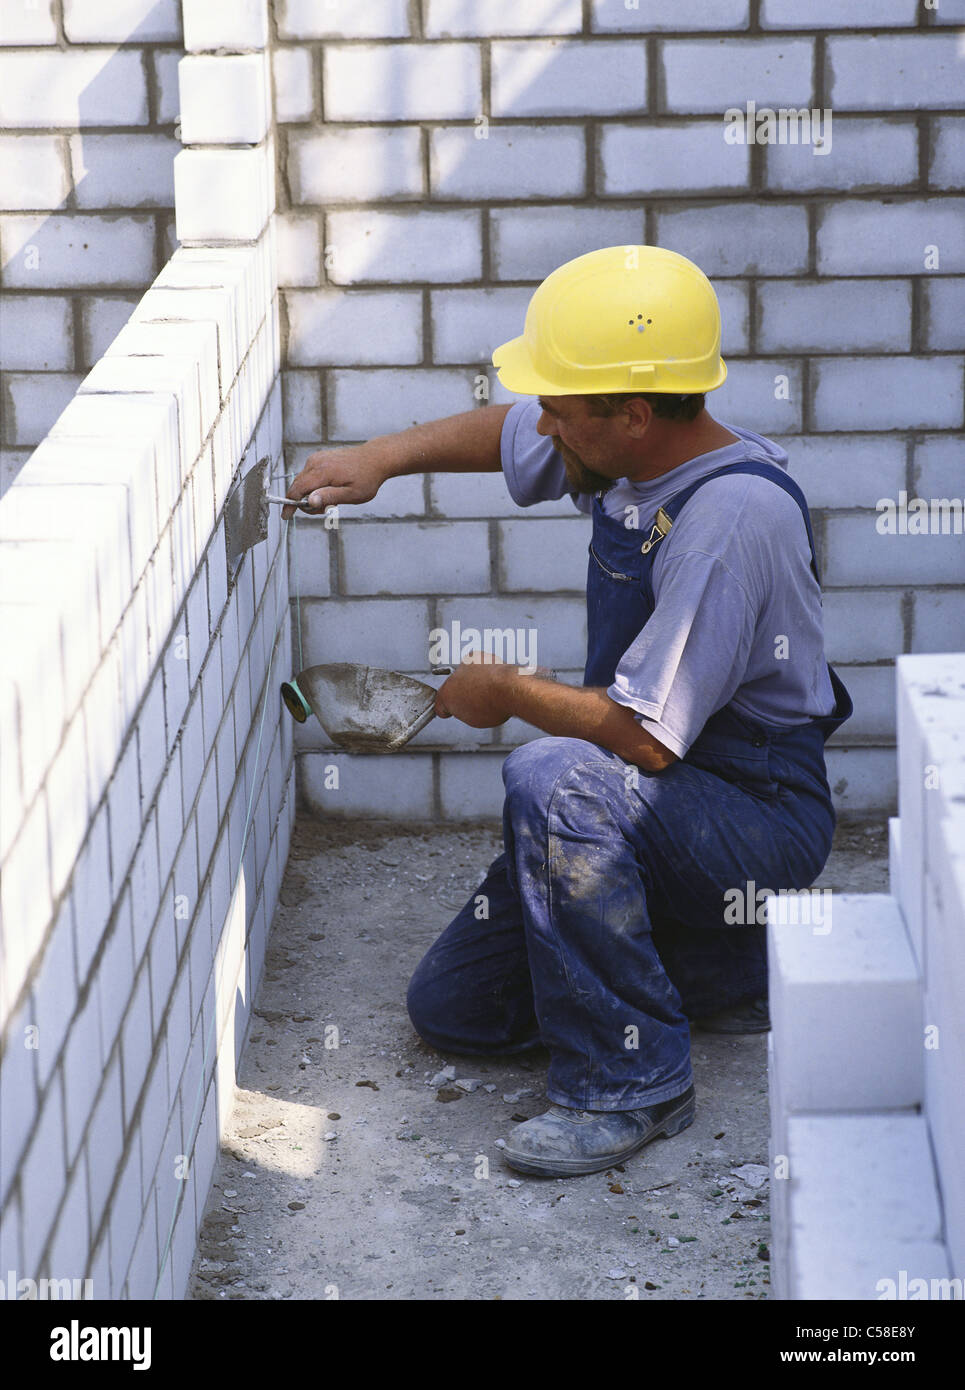 adult, architecture, brick-laying, bricklayer, building, caucasian, construction, economy, hard hat, house, housebuilding, indus Stock Photo